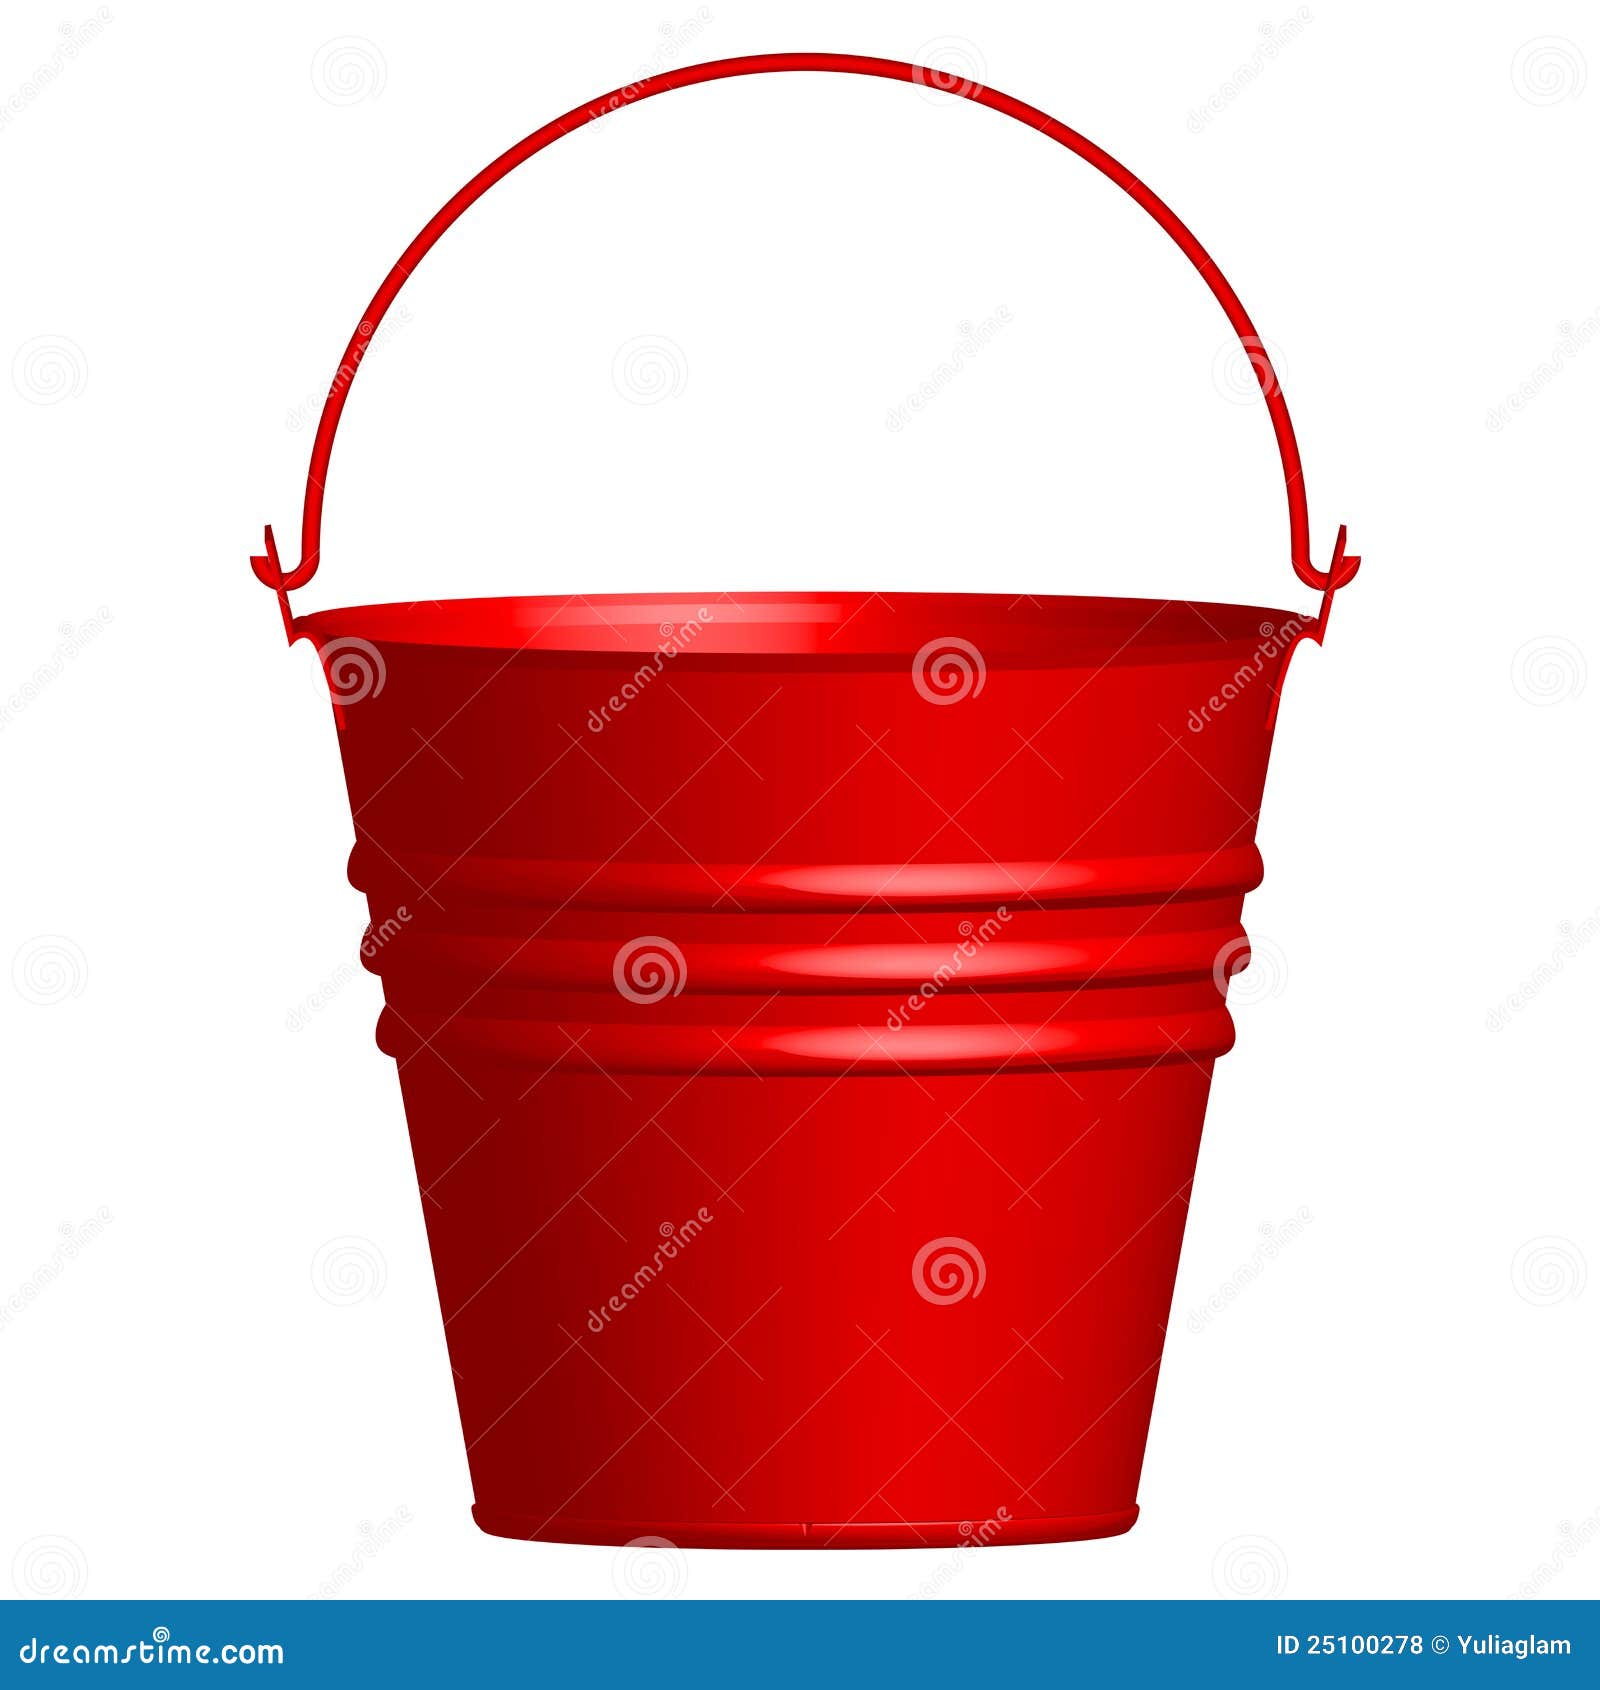 Red Bucket Royalty Free Stock Photos  Image: 25100278